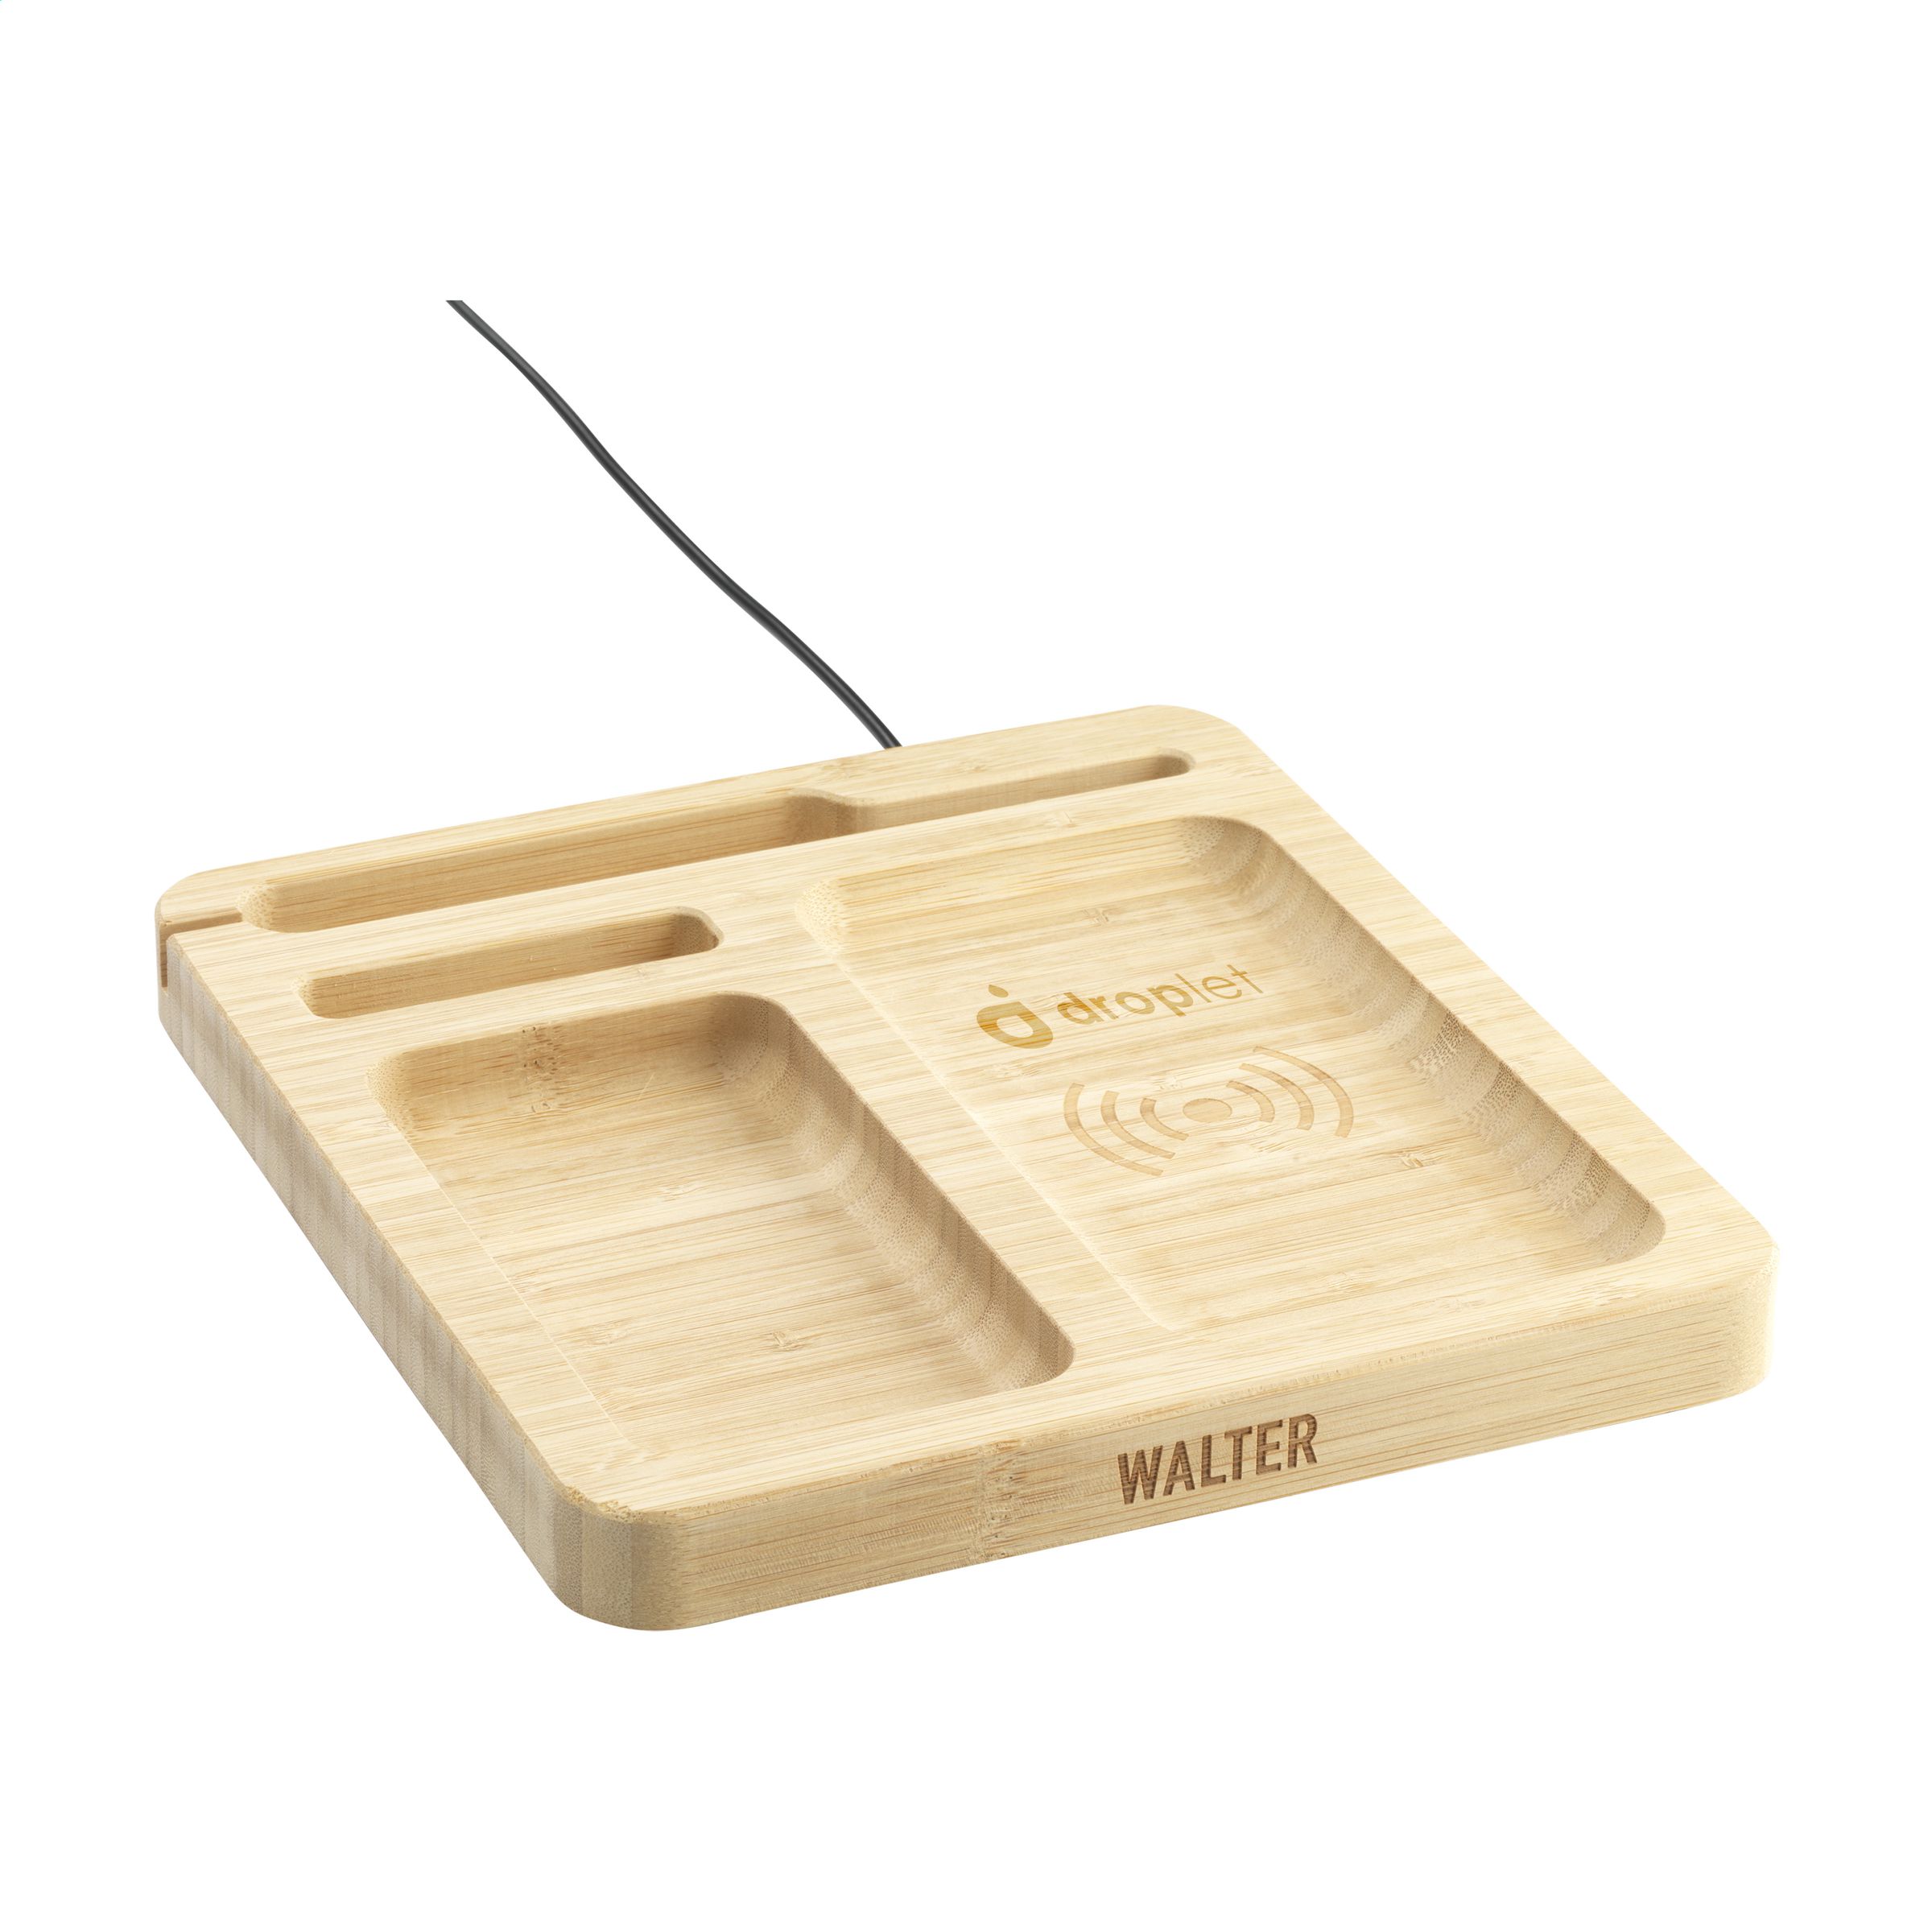 A bamboo desk organizer that includes a wireless charger - Located in Chipping Norton - Telford